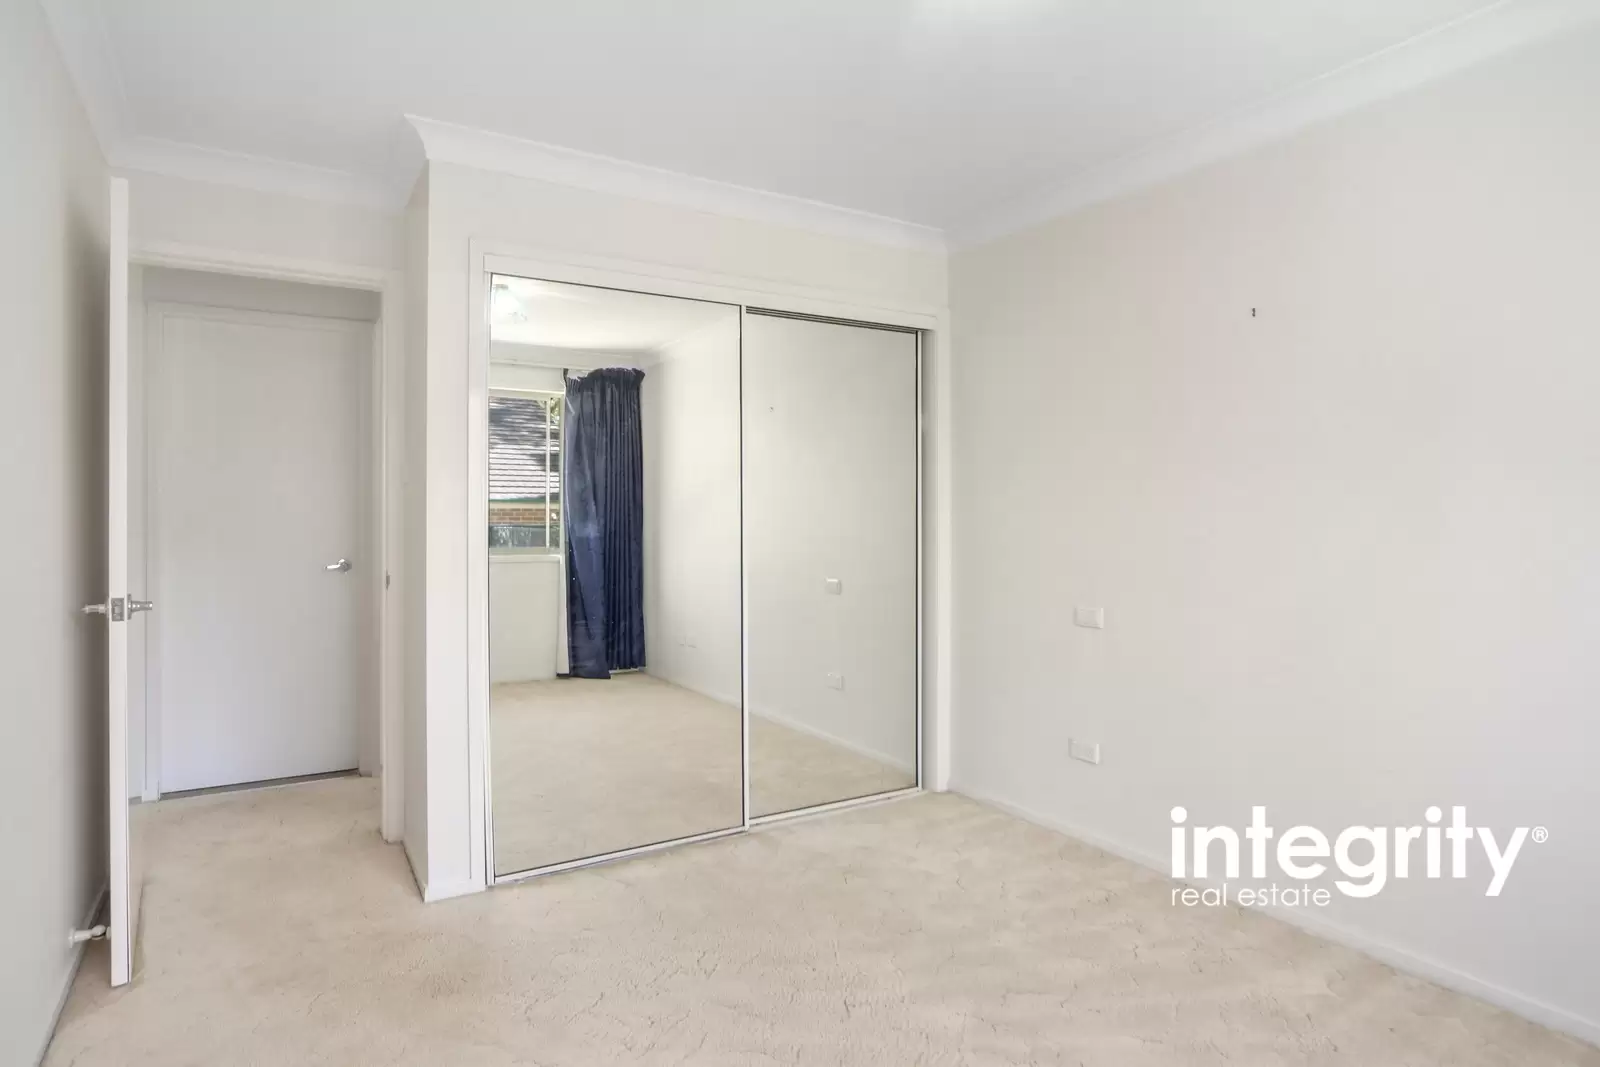 1/5 Elwin Court, North Nowra Sold by Integrity Real Estate - image 5